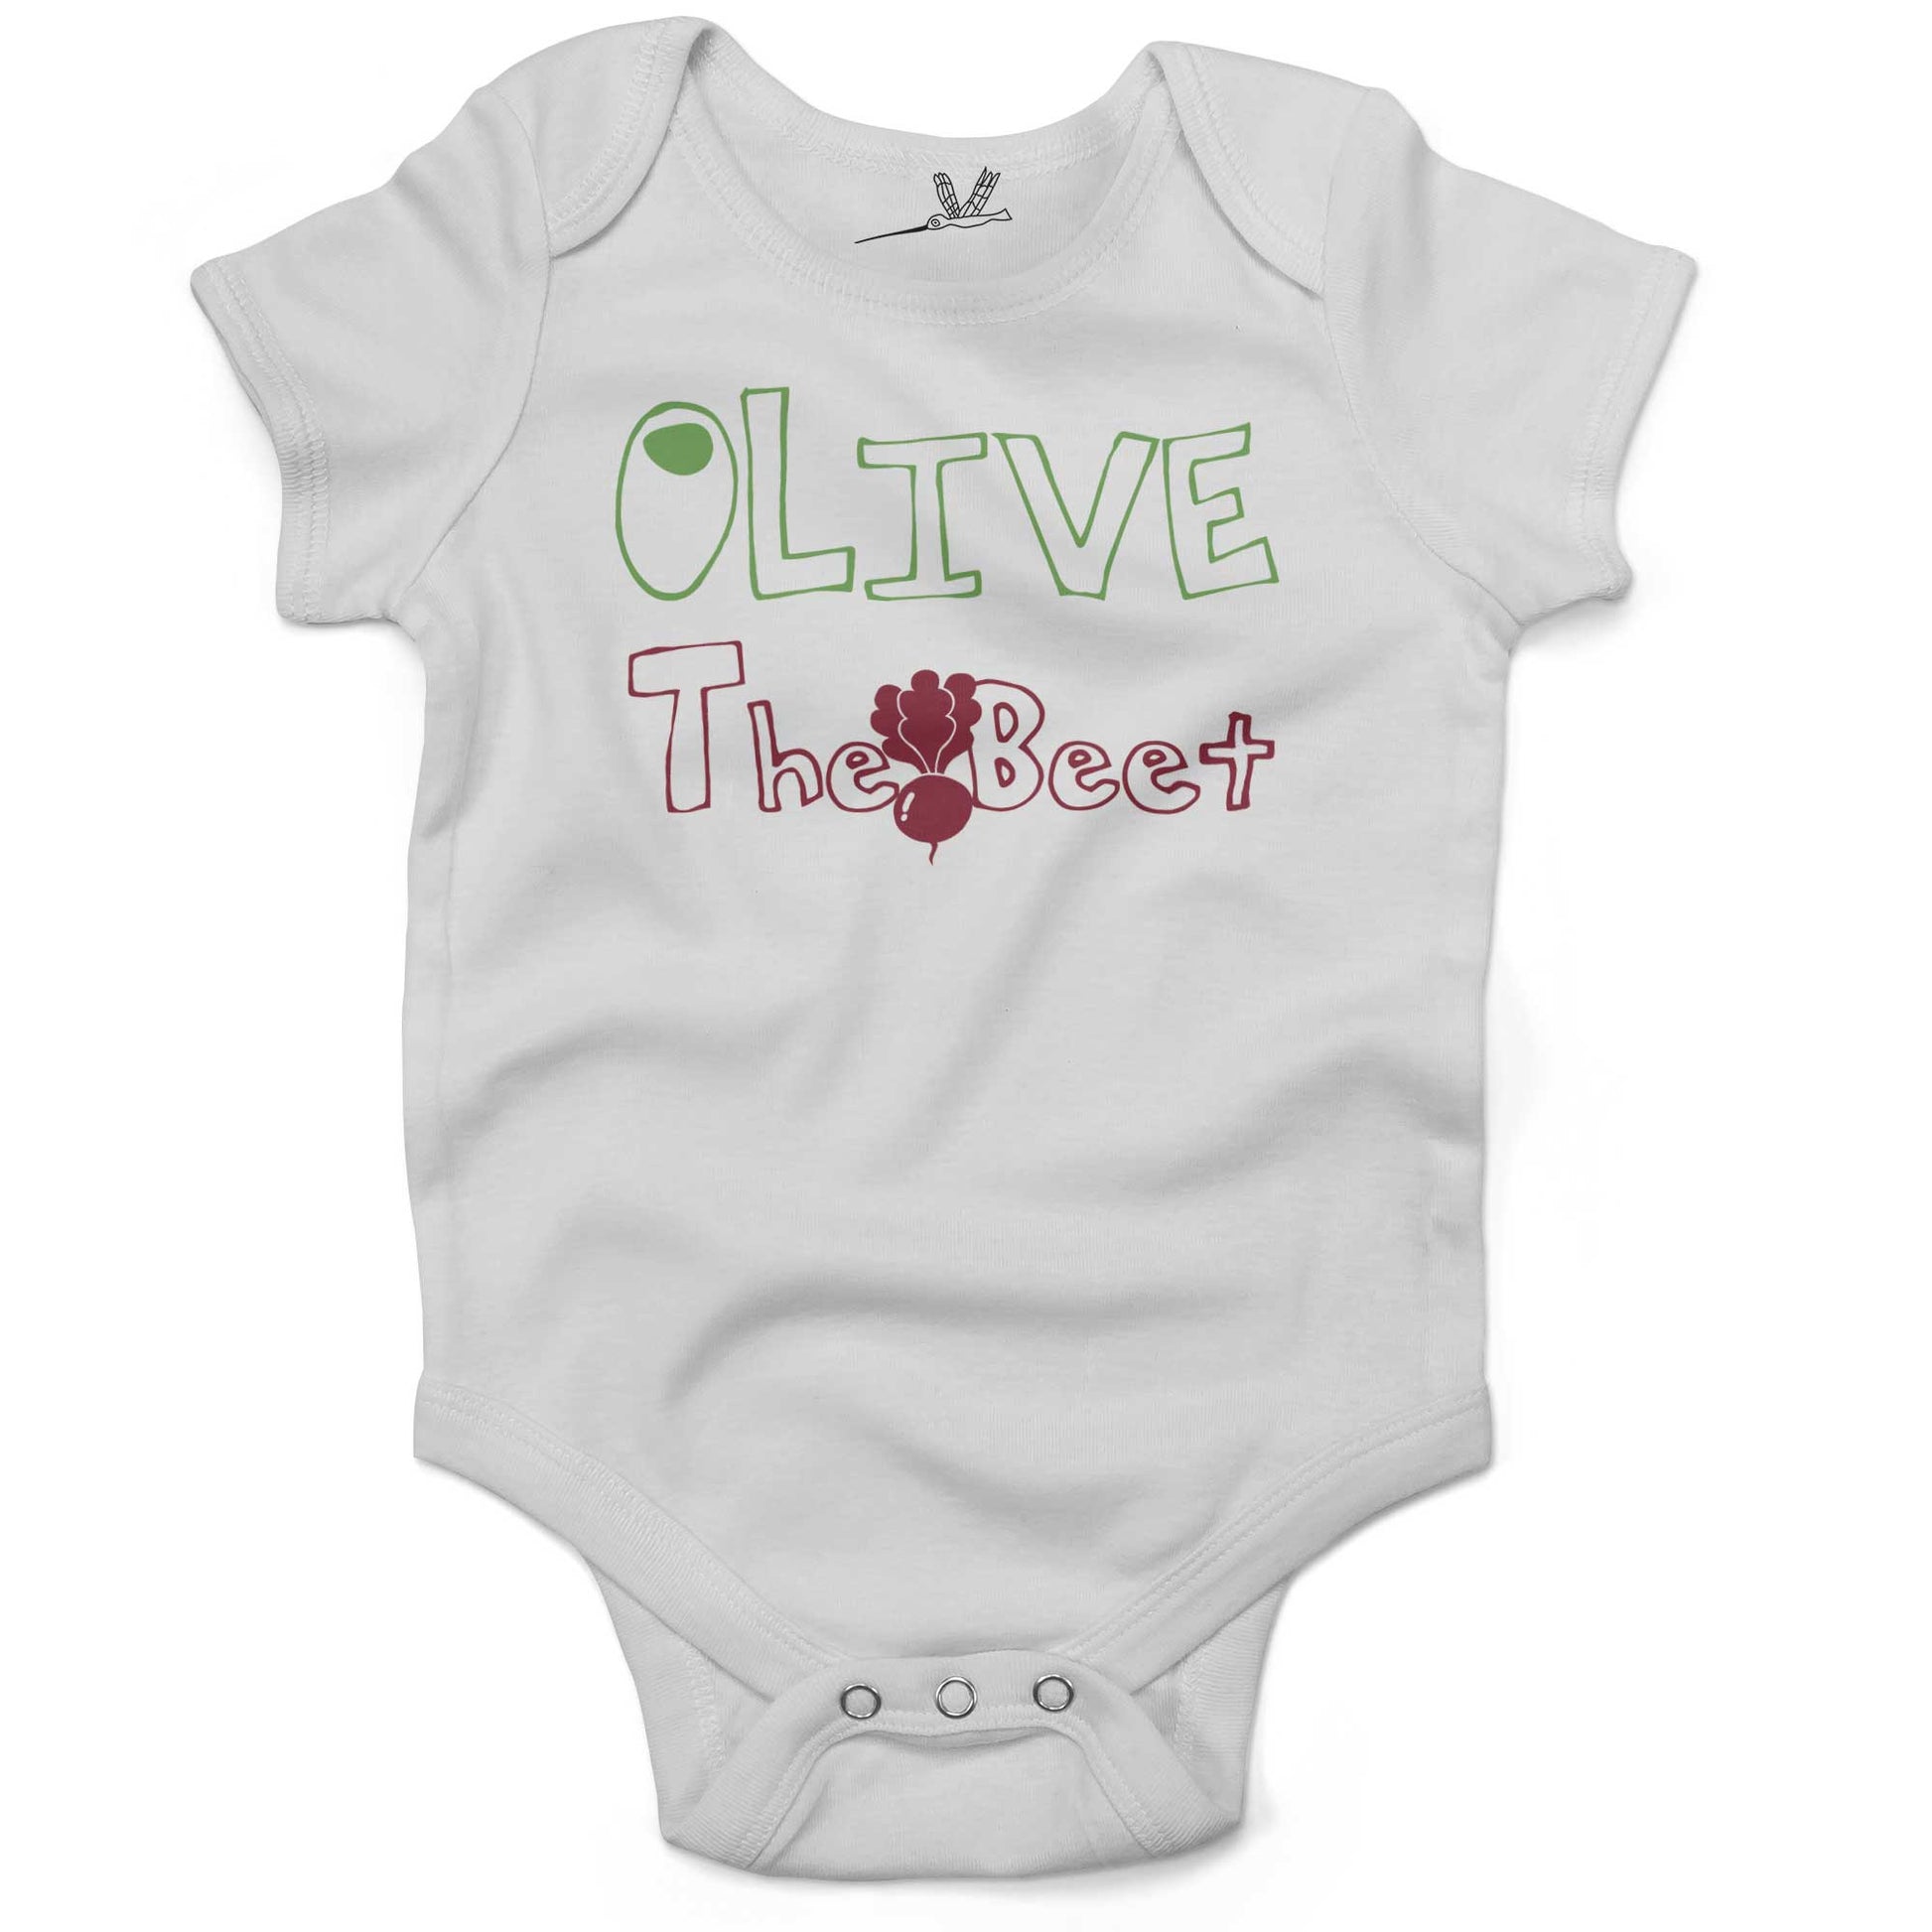 Olive The Beet Infant Bodysuit or Raglan Baby Tee-White-3-6 months